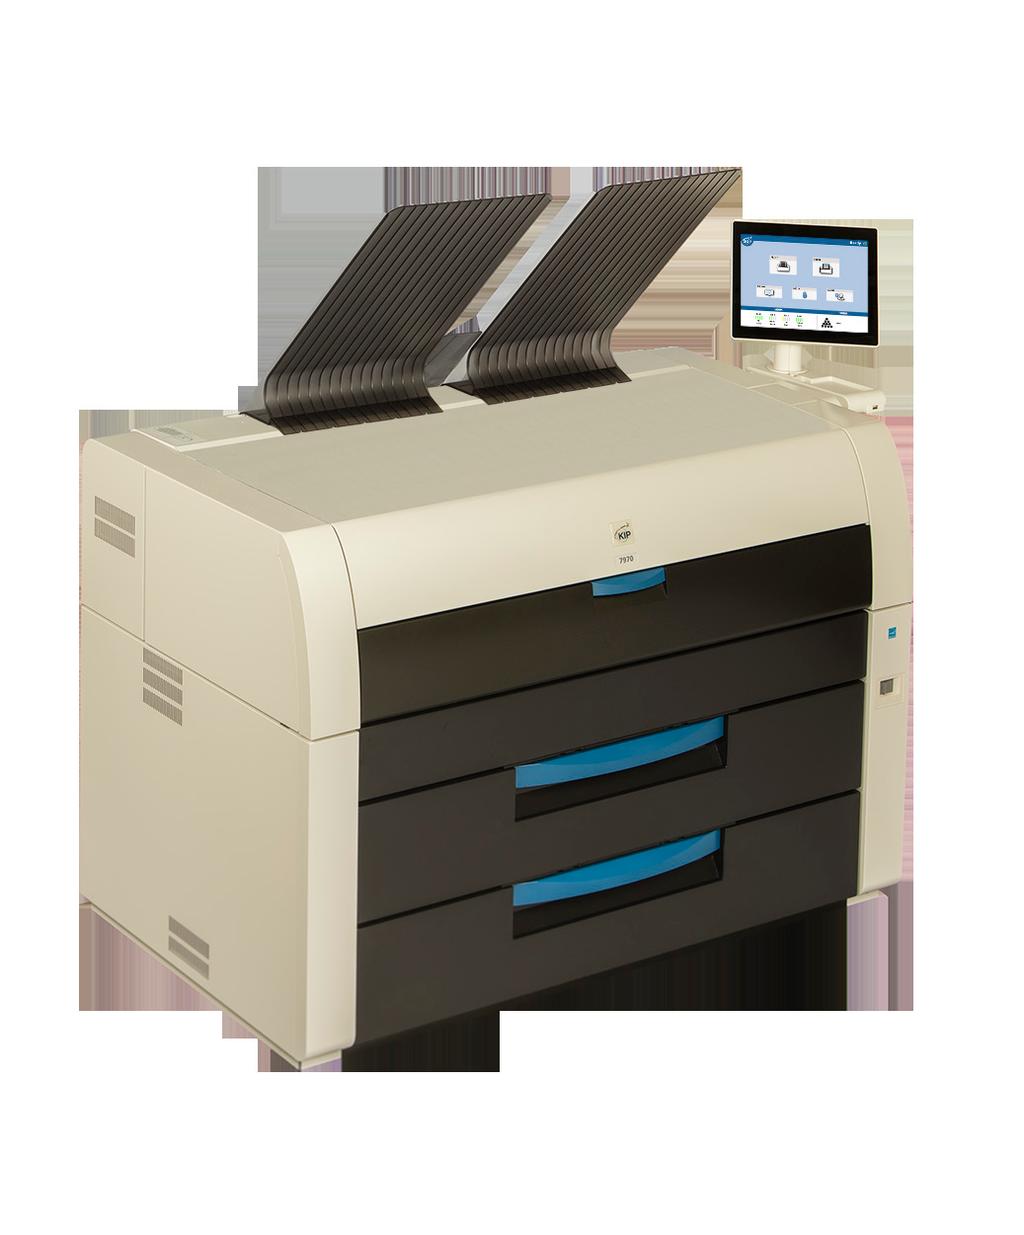 ADVANCED TECHNOLOGY KIP 79 Series Systems are the leading advanced solutions for technical printing professionals